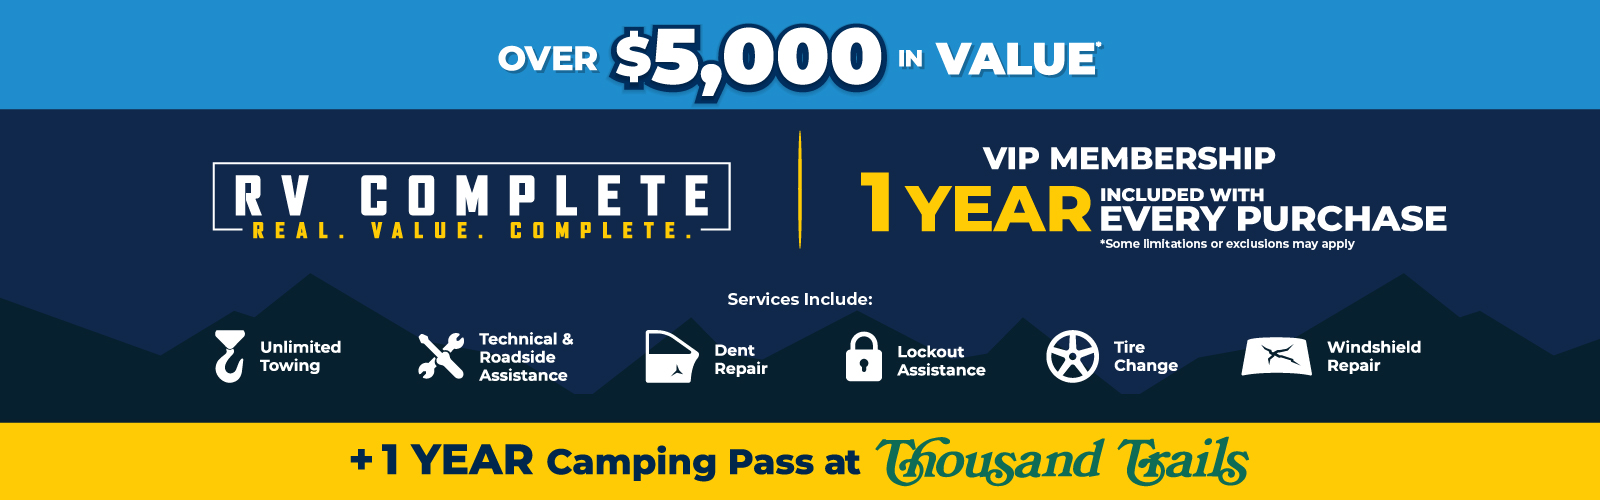 RV Complete over $5,000 in Value